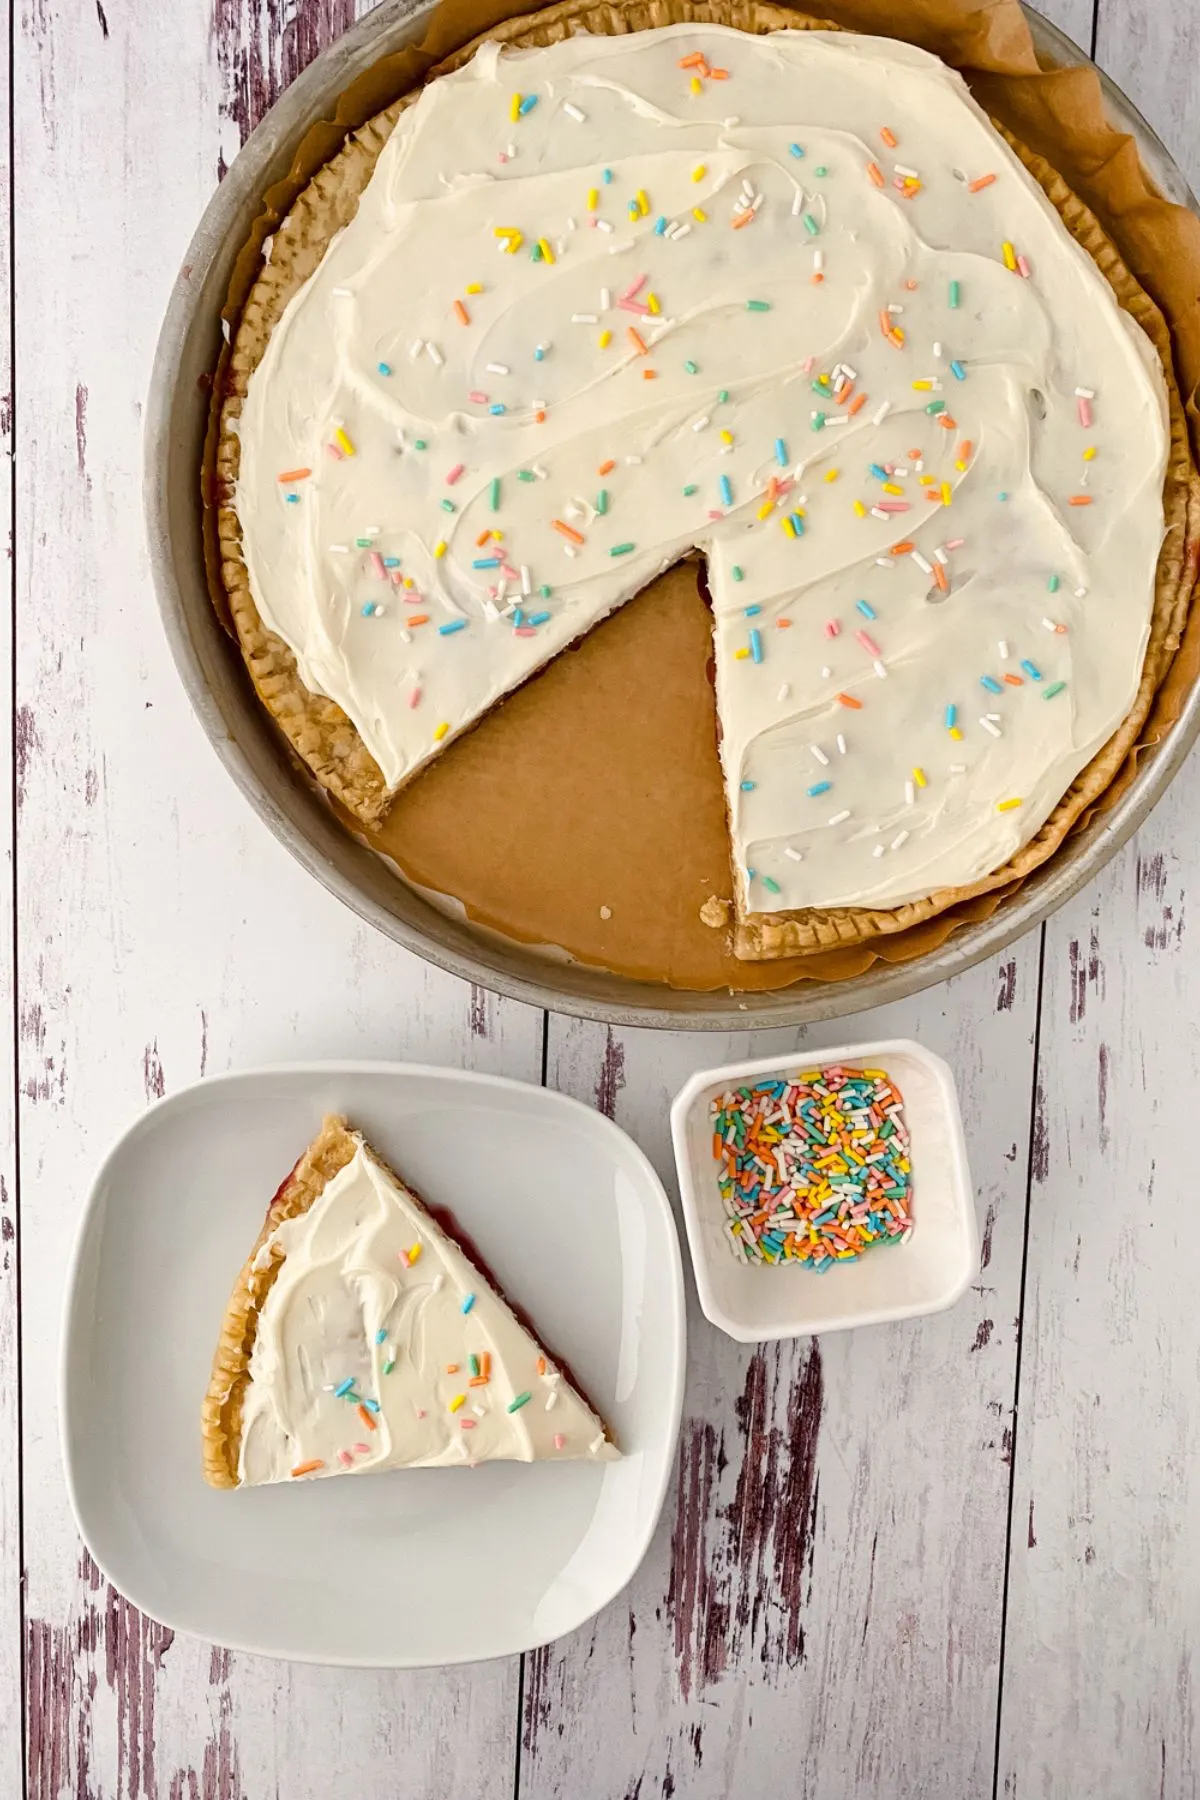 A piece of a Giant Poptart on a plate next to the rest of the big one.